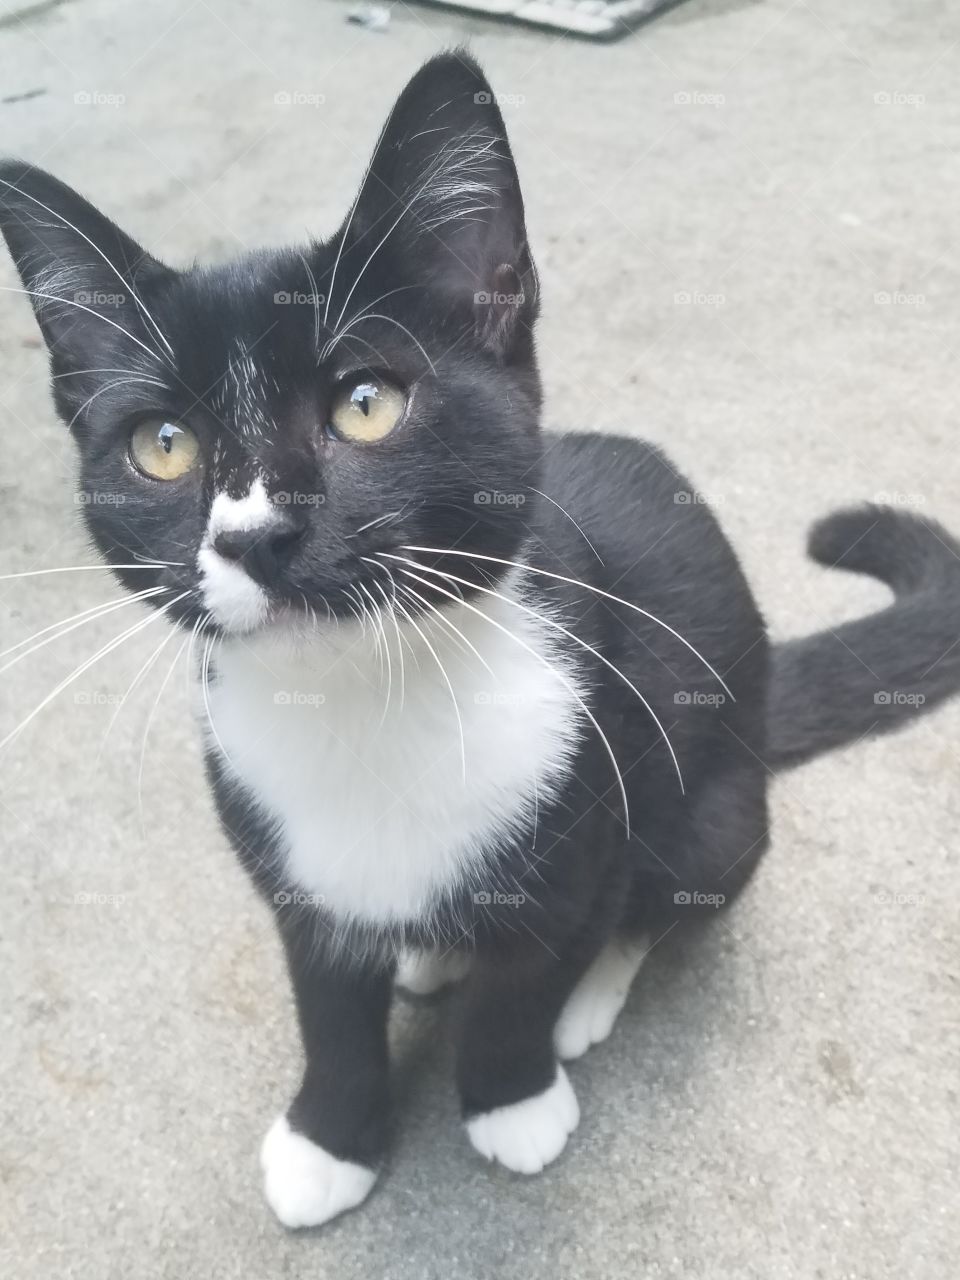 hi, they call me a tuxedo cat but I dont have any pants. lol